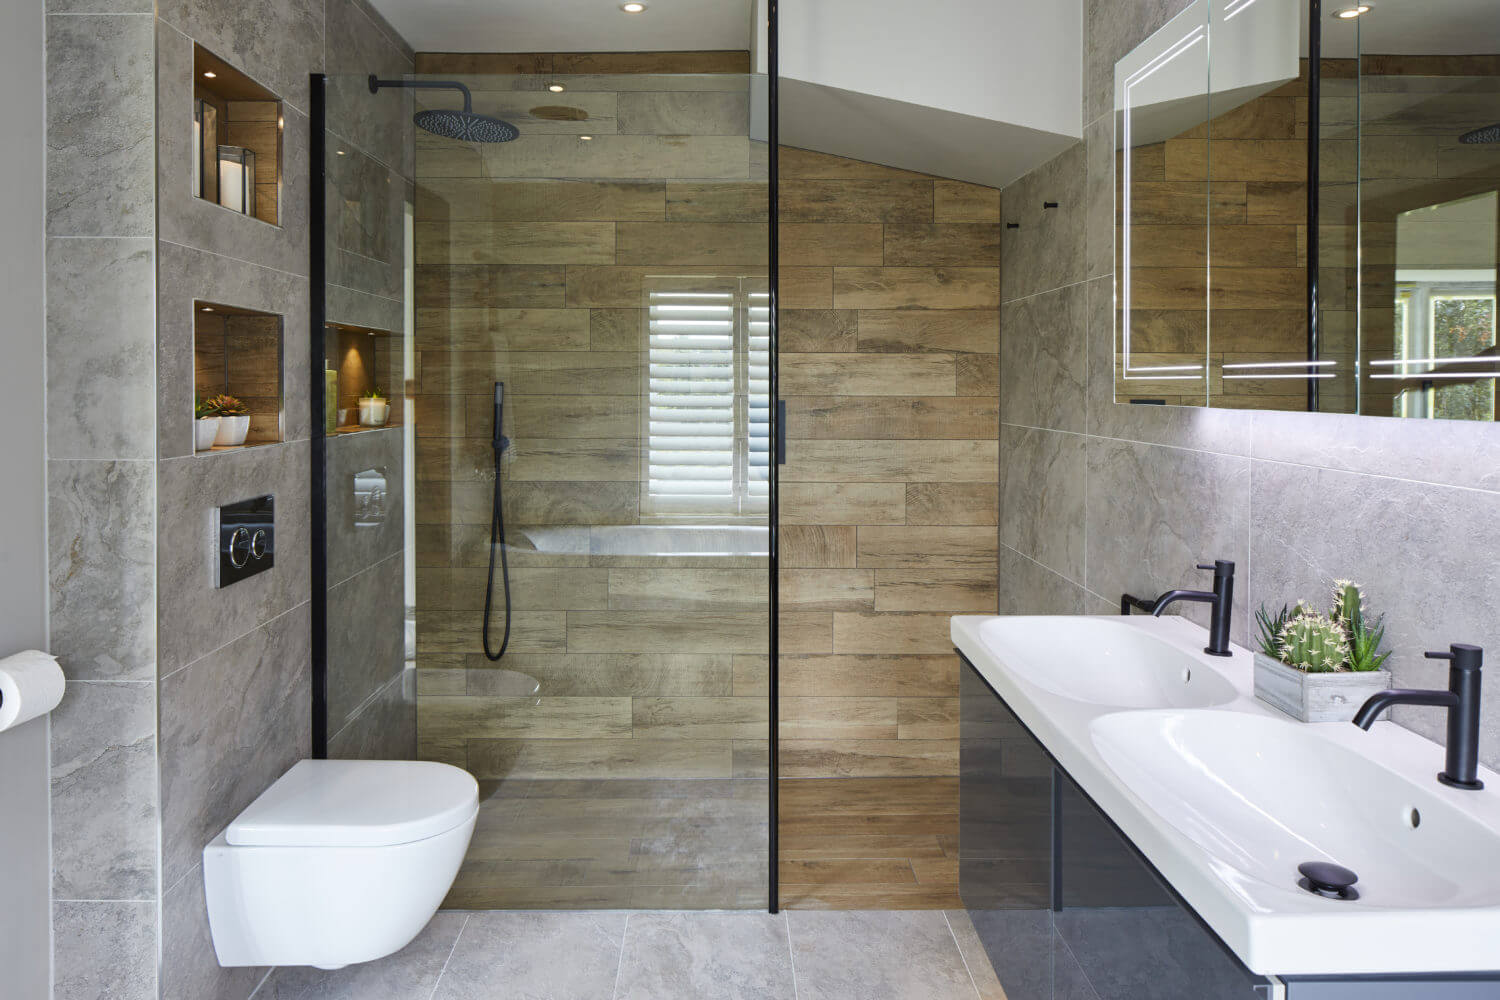 The Best in Chobham For Beautiful Bathrooms | Bathroom Eleven